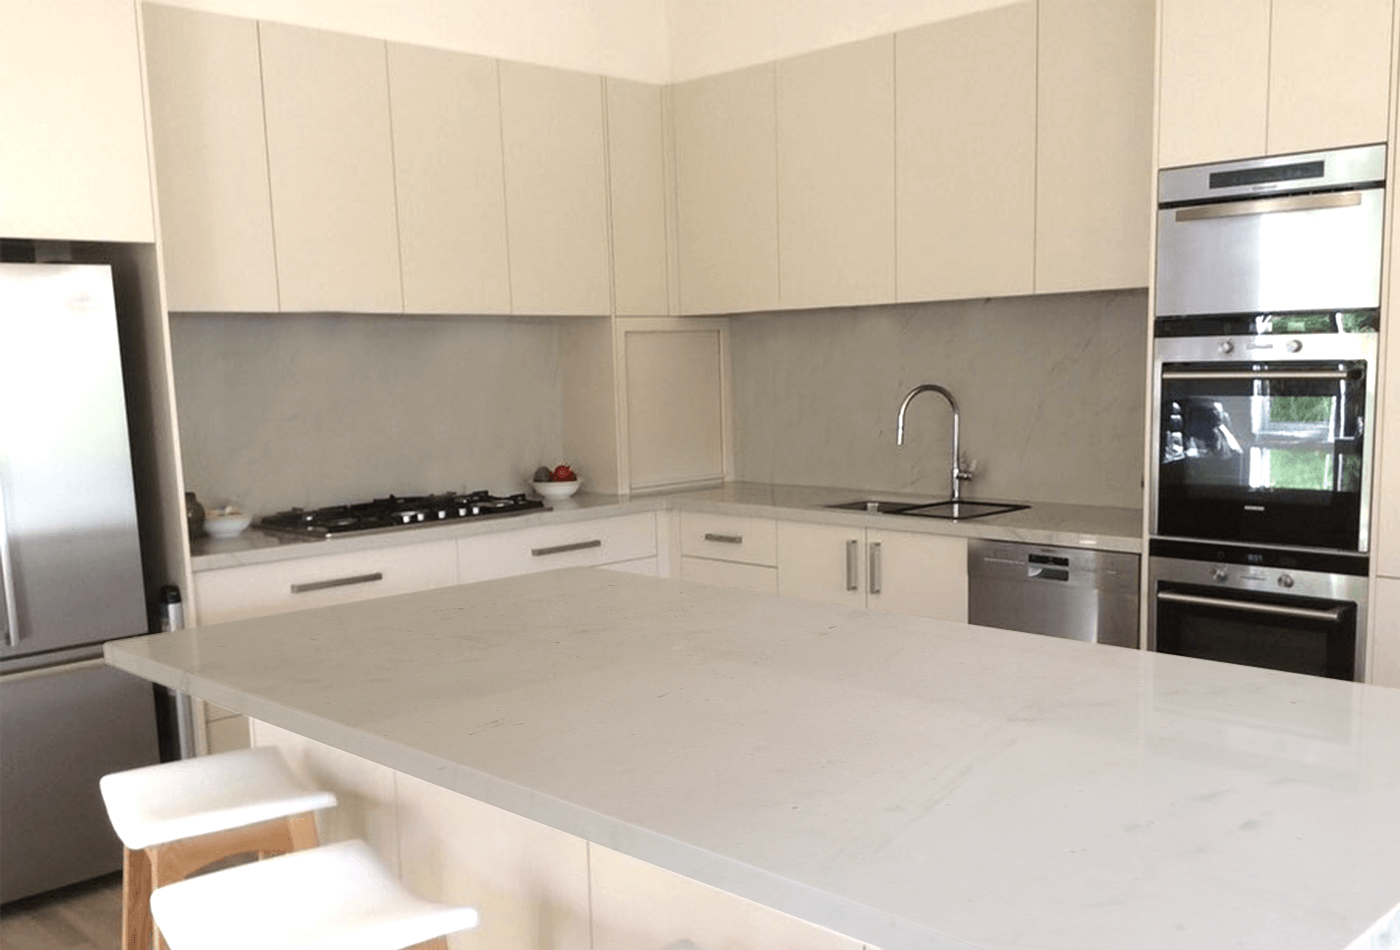 Caliza Marbella Marble; A Kitchen to Remember